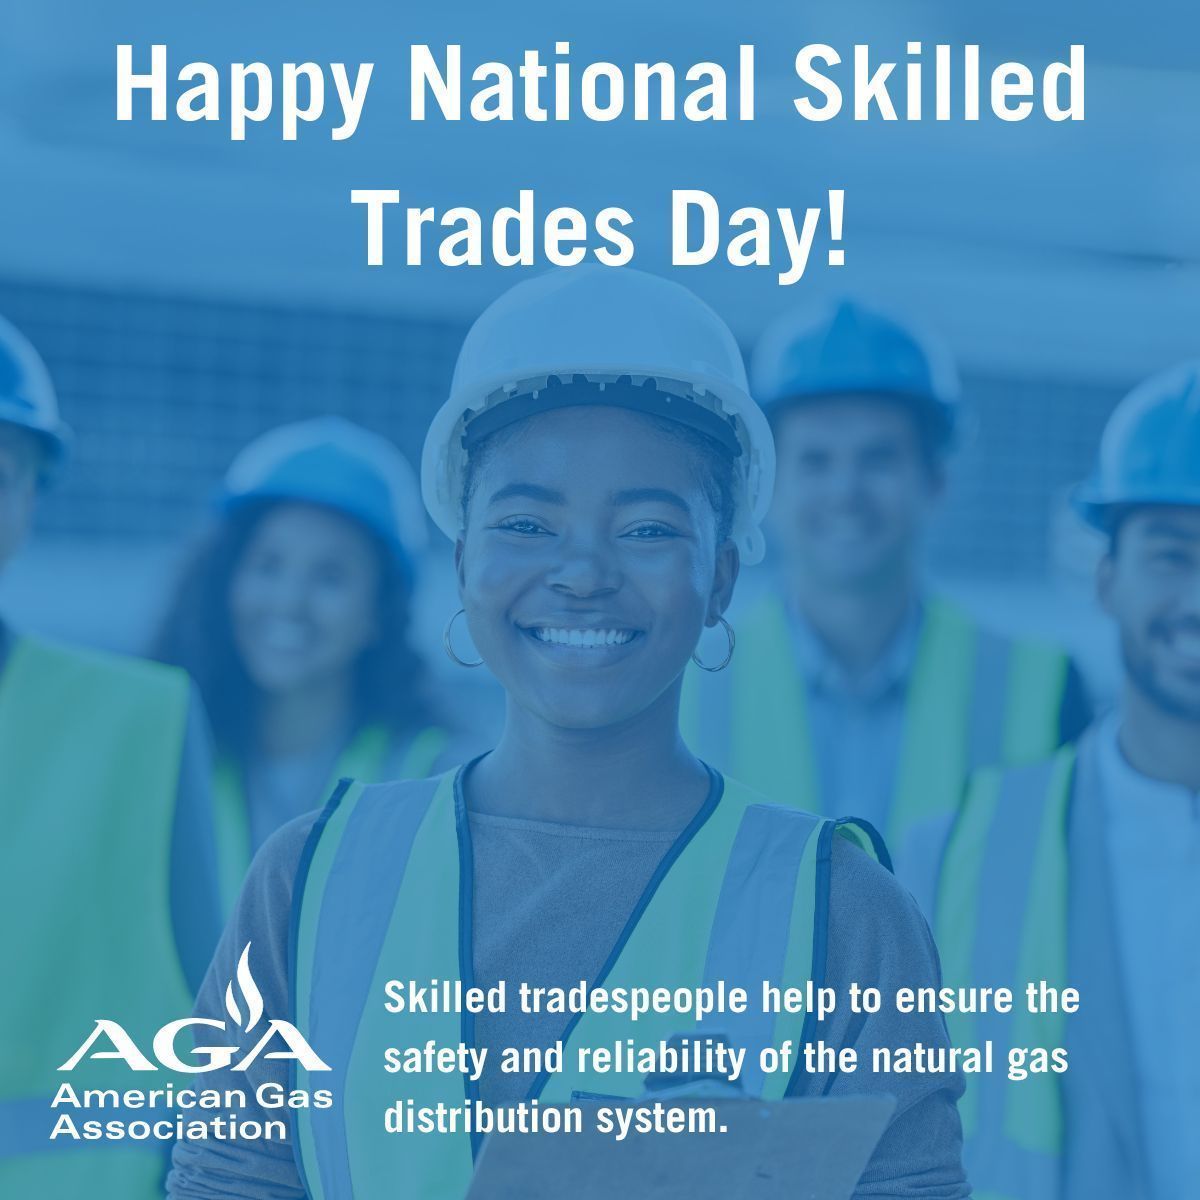 Skilled tradespeople help ensure the safe and reliable distribution to communities across the country. Join us in saying thank you this #NationalSkilledTradesDay, and check out the countless stories of how skilled trade workers impact their communities at buff.ly/4di5BLZ